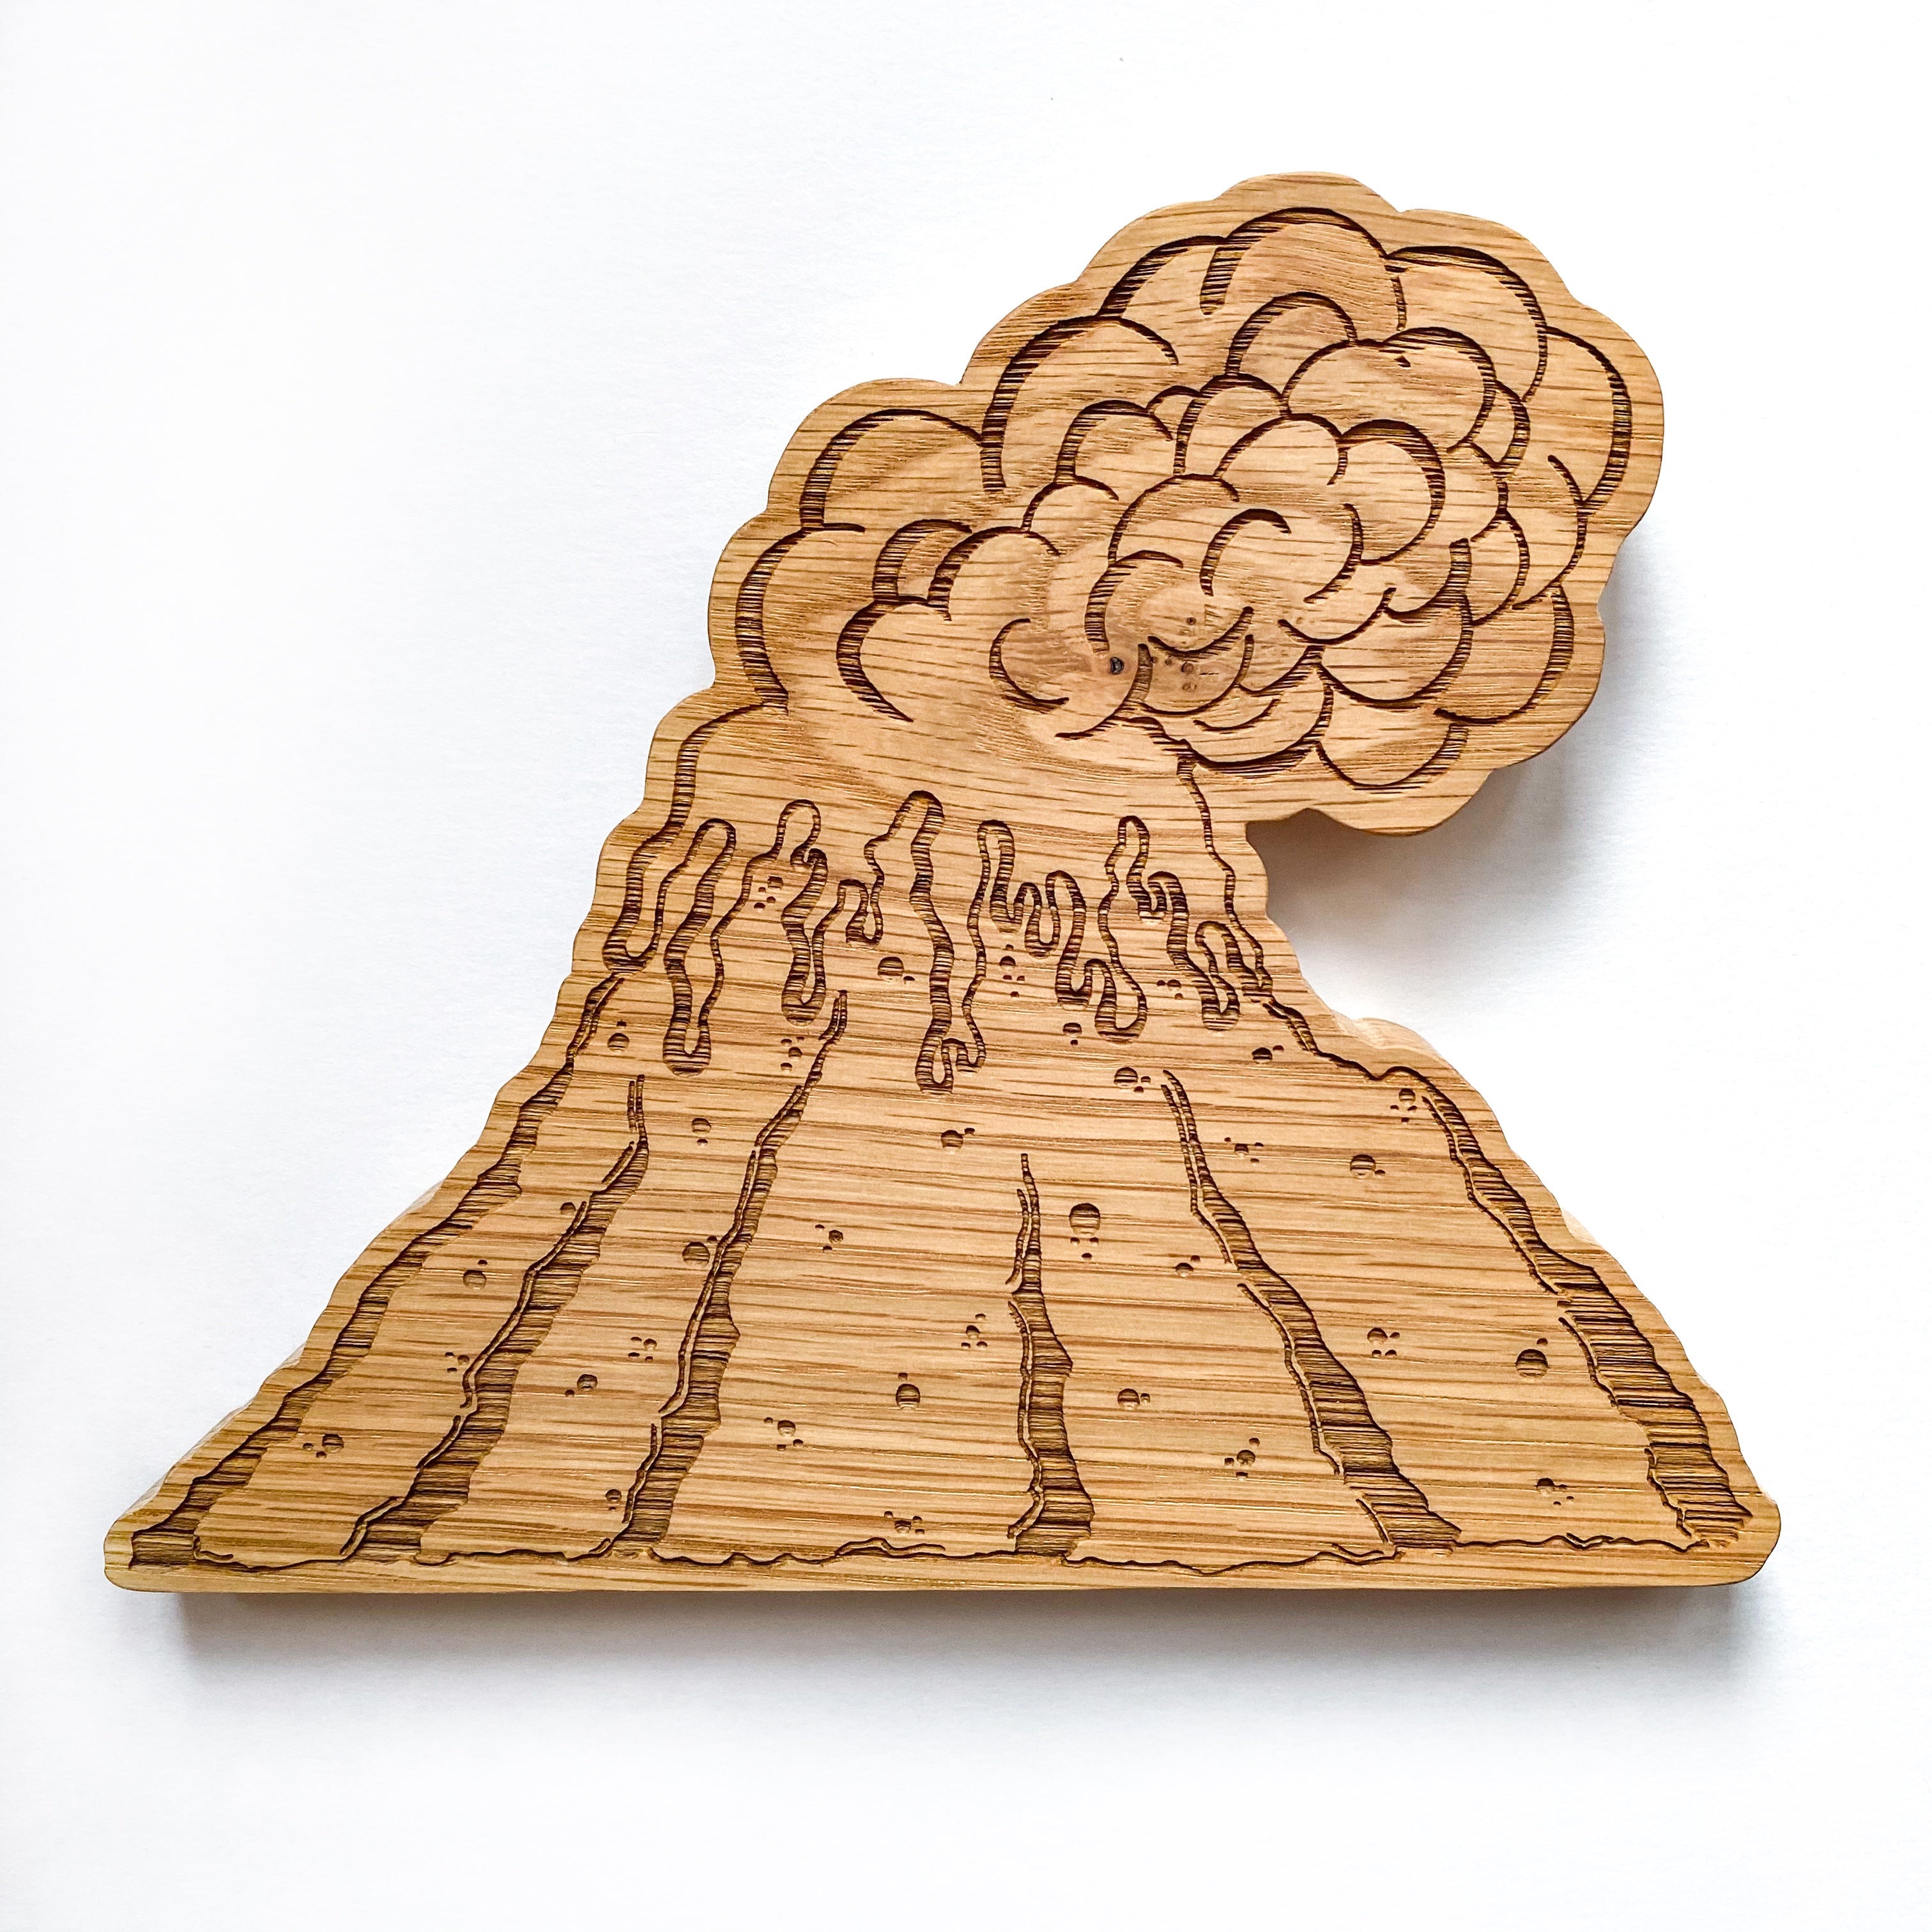 Wooden Oak lasered volcano with smoke cloud on a white background.